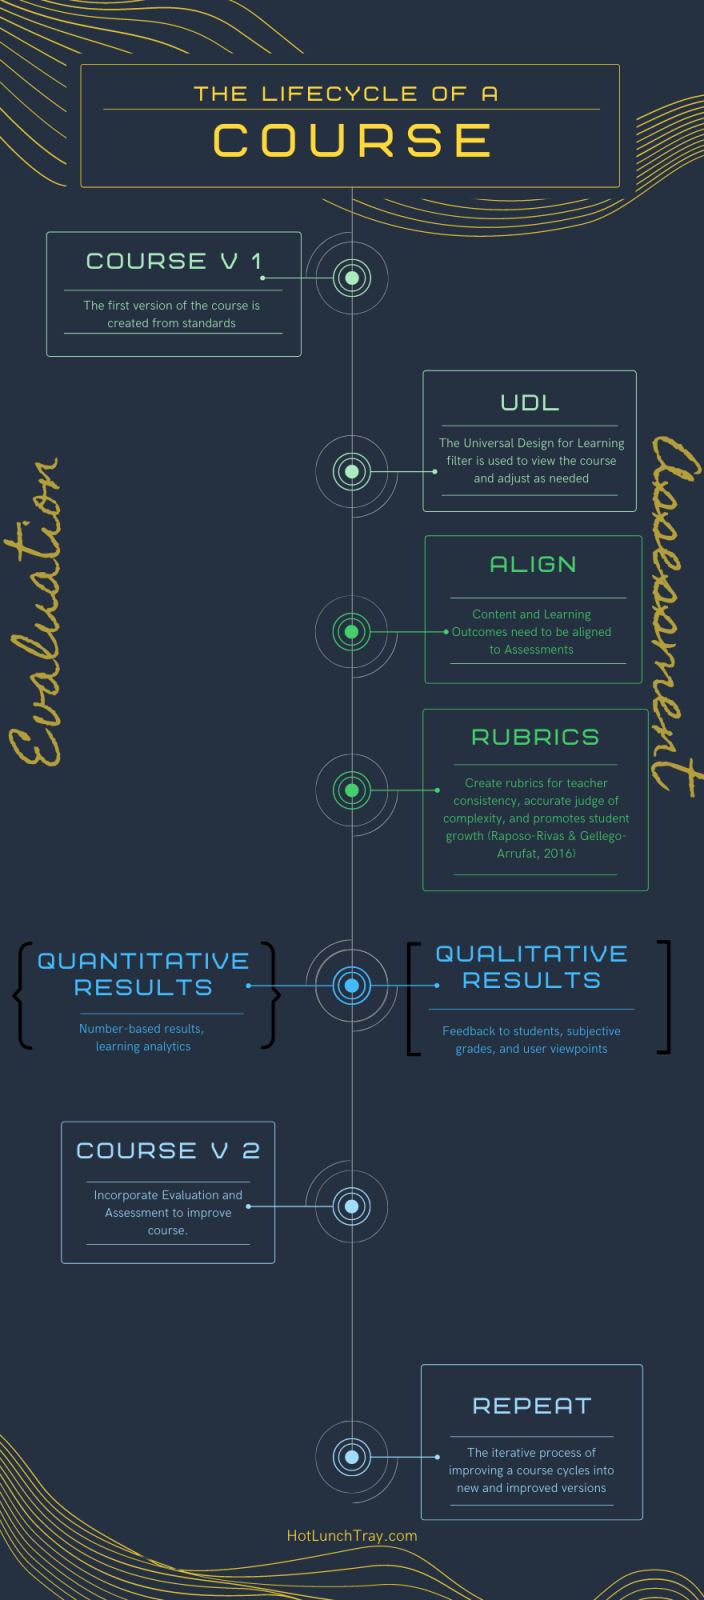 The Lifecycle of a Course Infographic